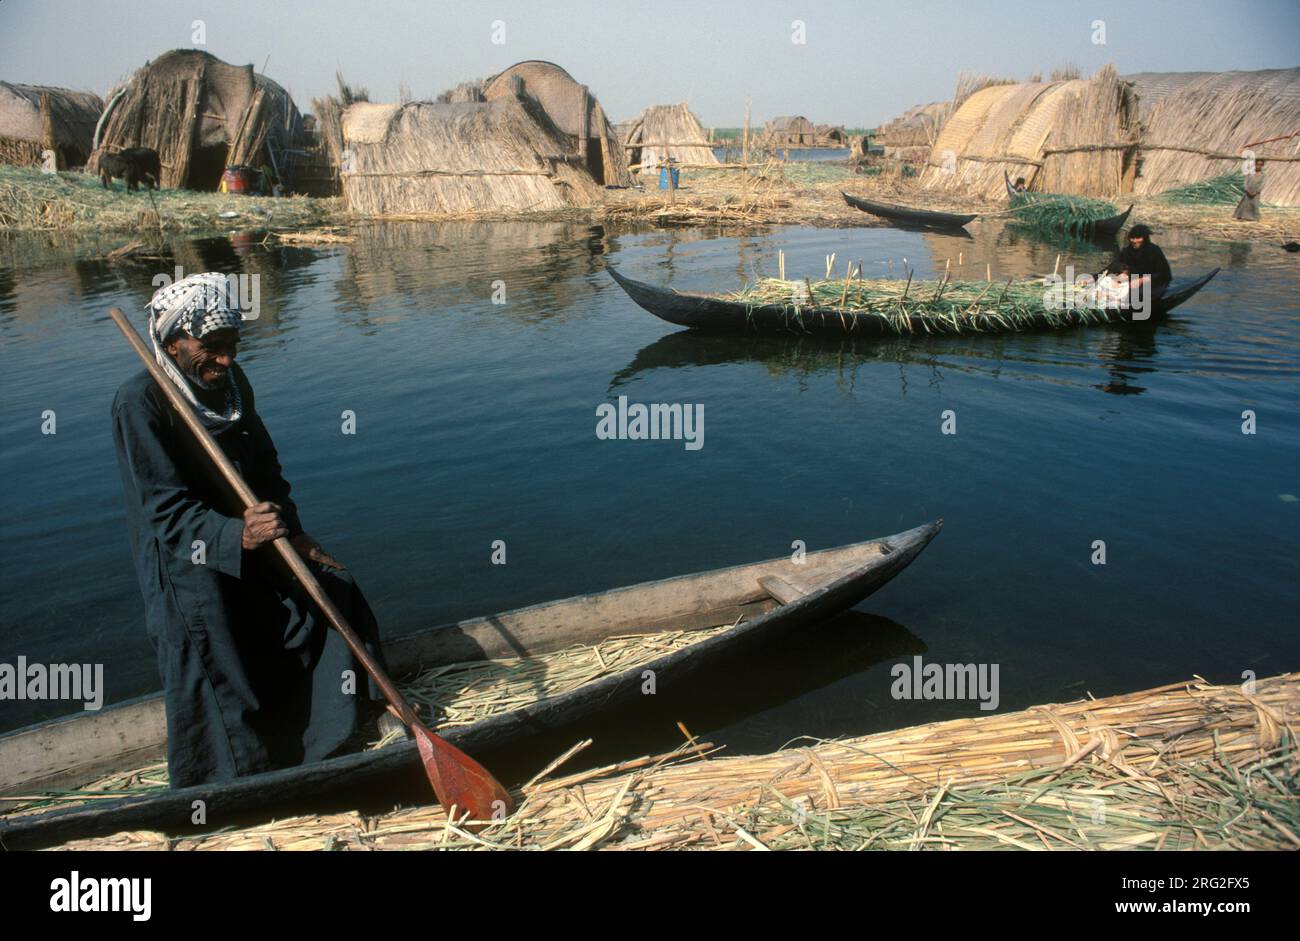 Marsh Arabs Iraq. Marsh Arab man and woman in boats. Transport freshly cut reeds between islands known as dibin. Reed island houses. Rivers Tigris and Euphrates wetlands, Hammar marshes. Southern Iraq 1984 1980s HOMER SYKES Stock Photo